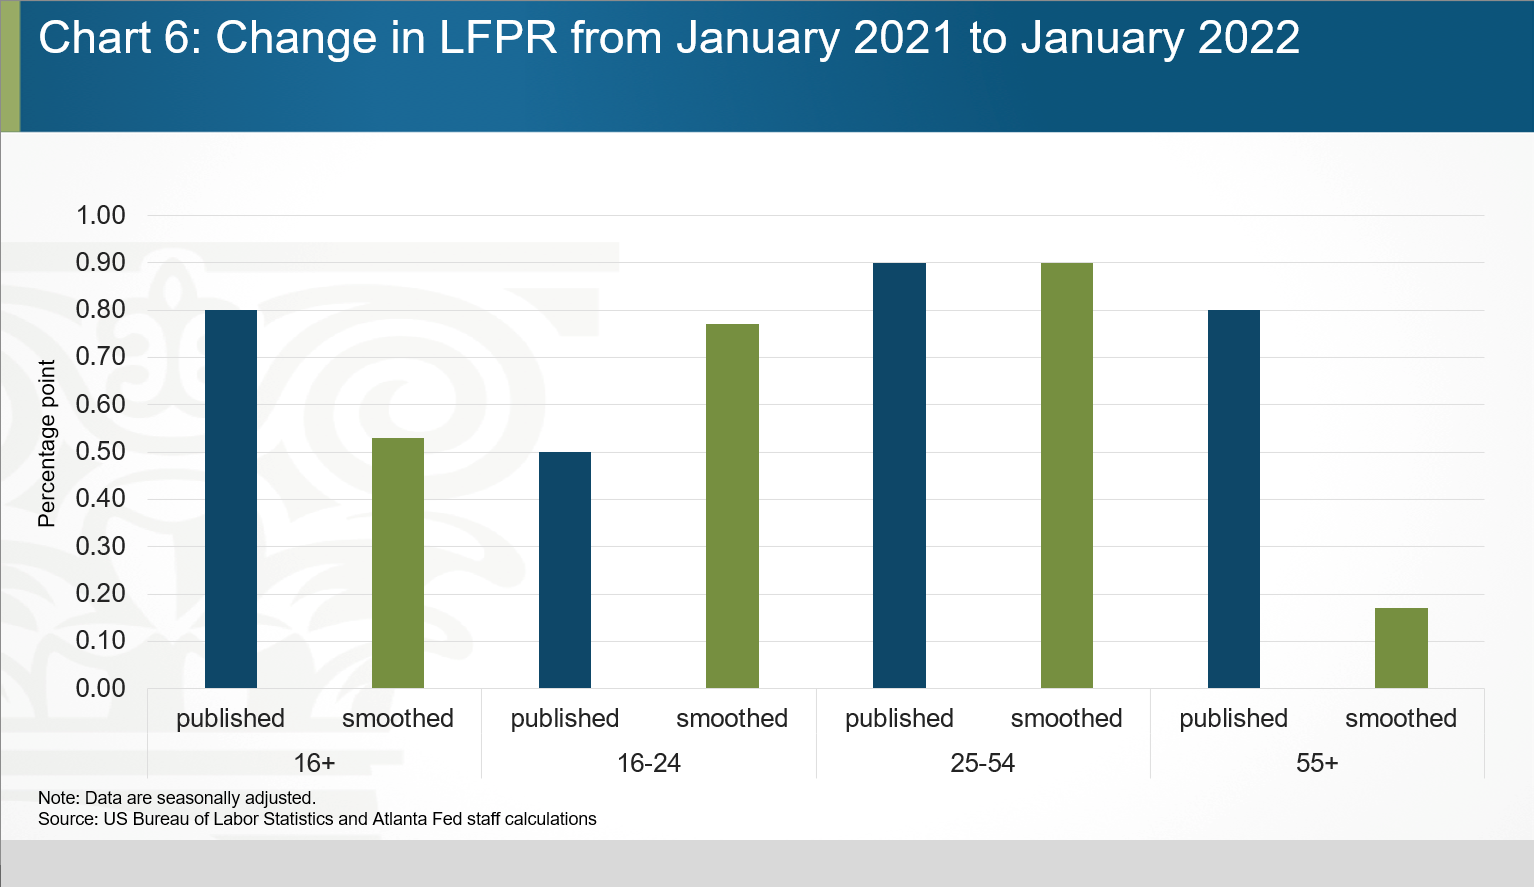 Chart 06 of 06: Change in LFPR from January 2021 to January 2022